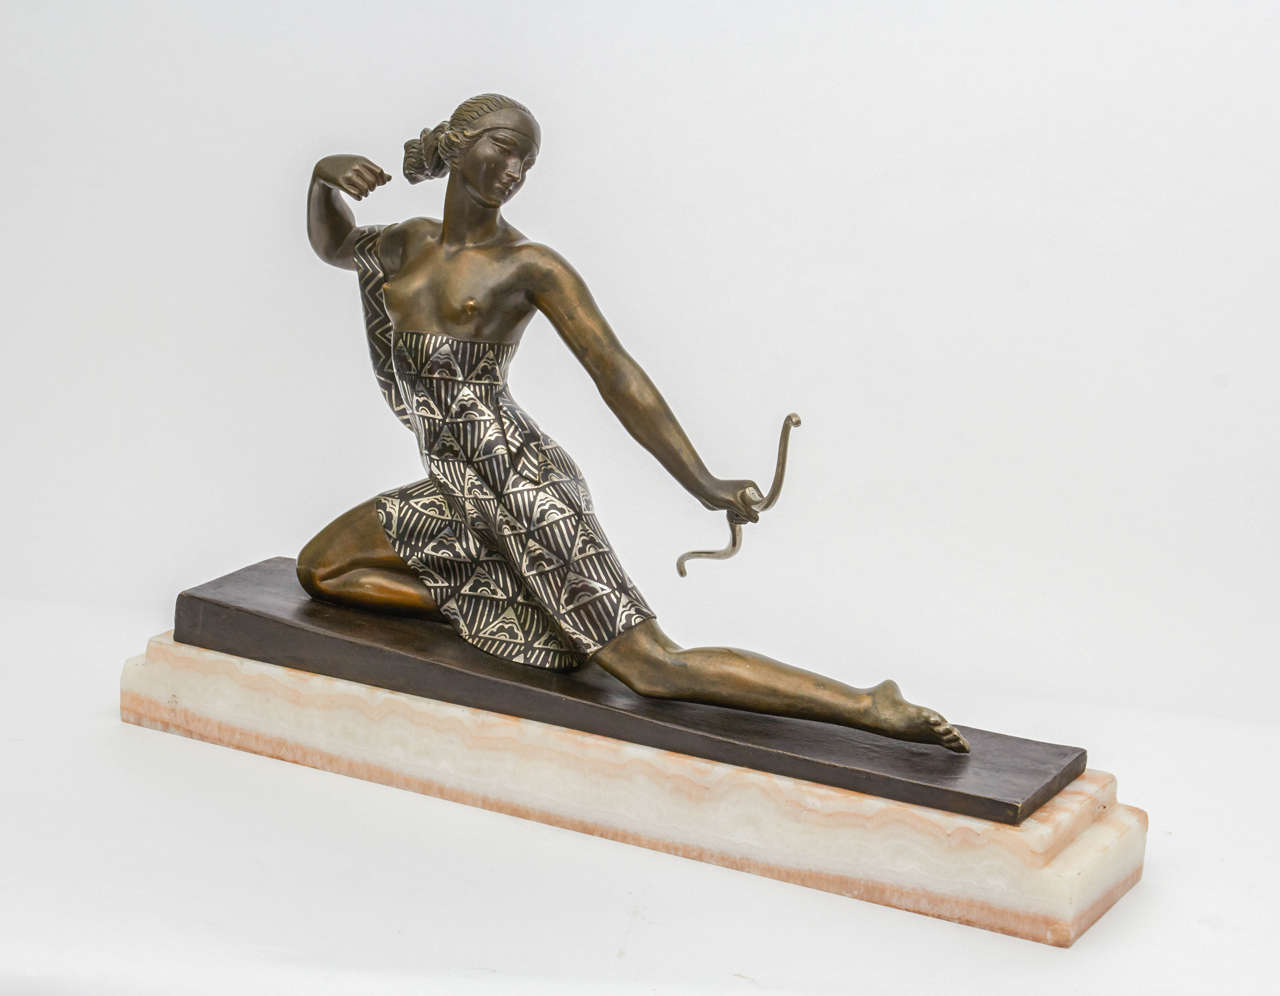 A French Art Deco archer figure, “Diana the Huntress” by Joseph Descomps (born J.E. Cormier, French, 1869-1950), from circa 1928. Patinated and enameled bronze, mounted on a white-yellow onyx base. Signed in the bronze.